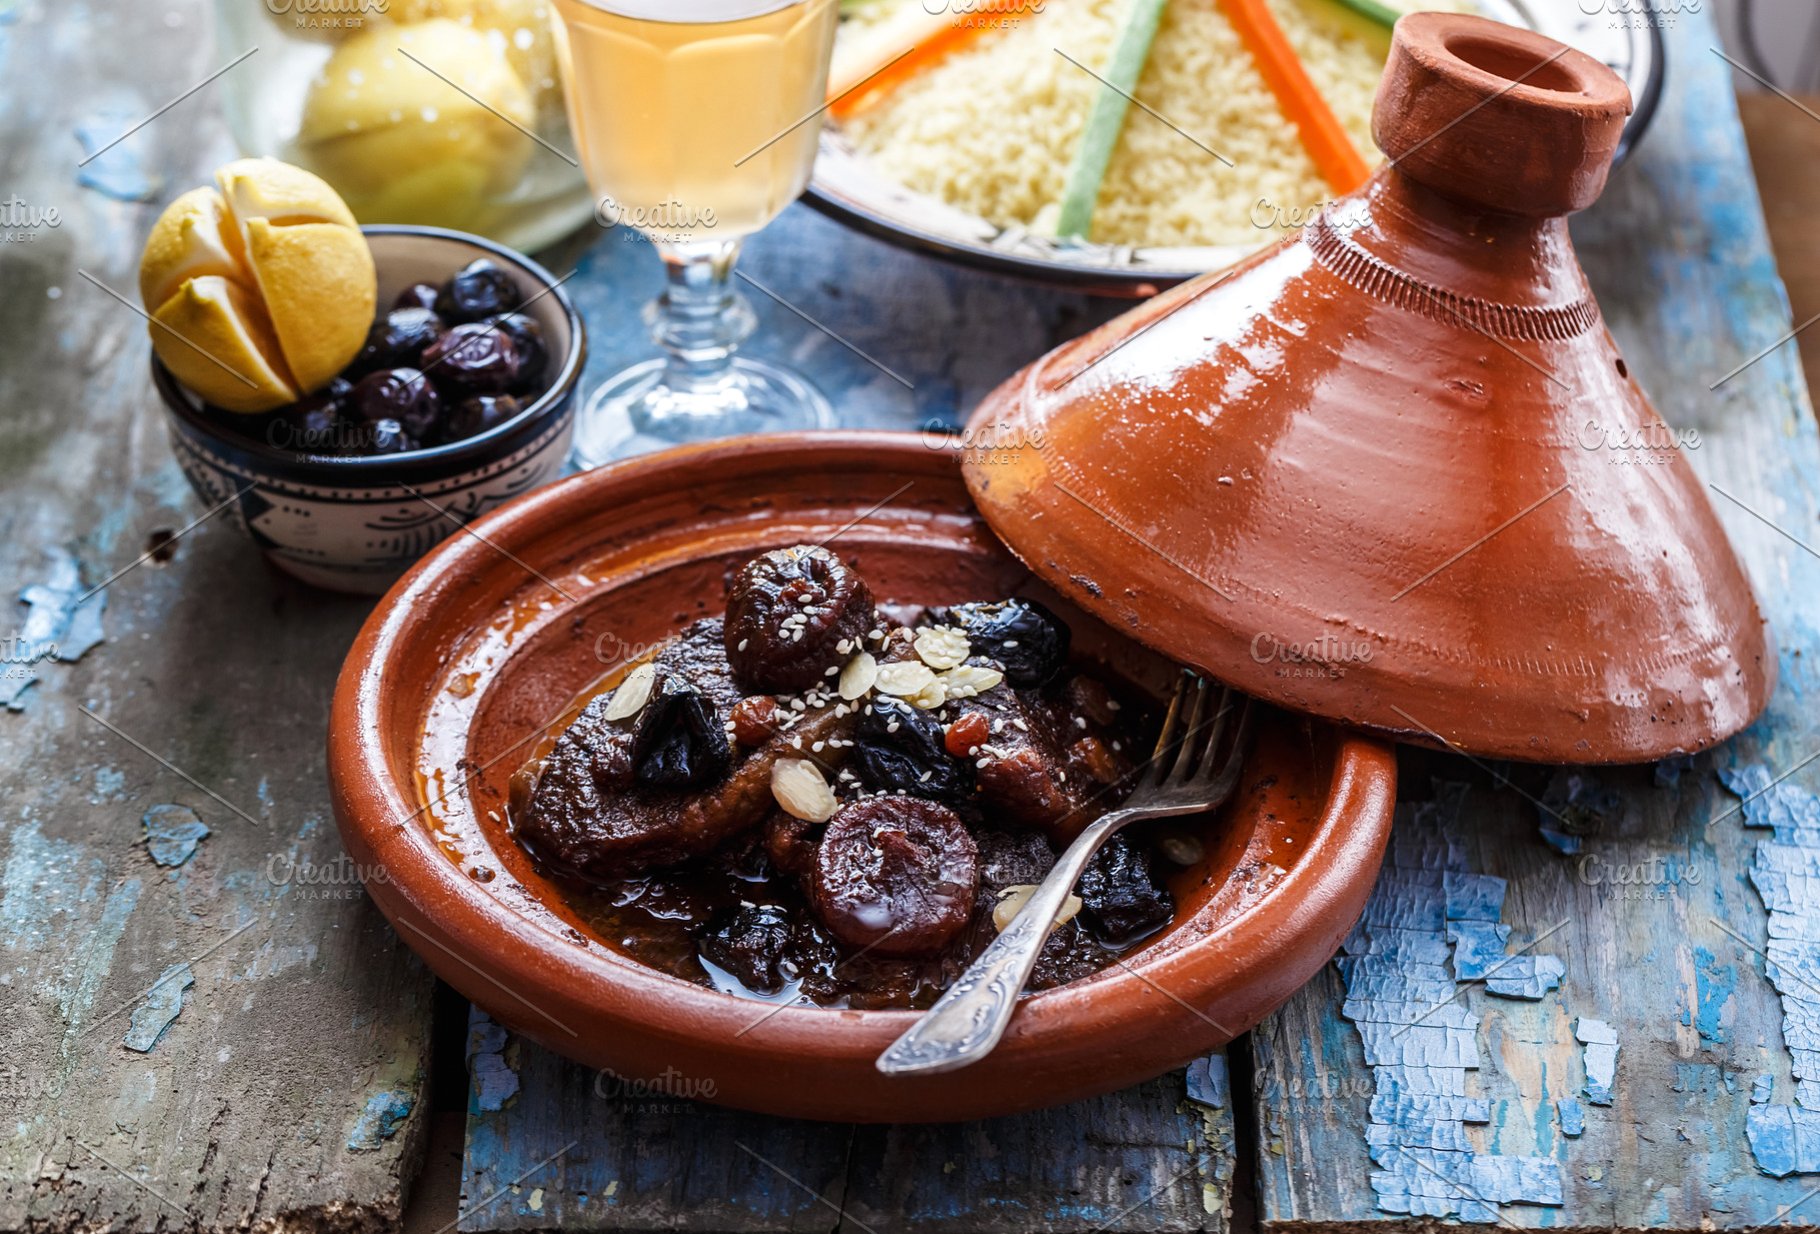 Prunes served with beef Morocco